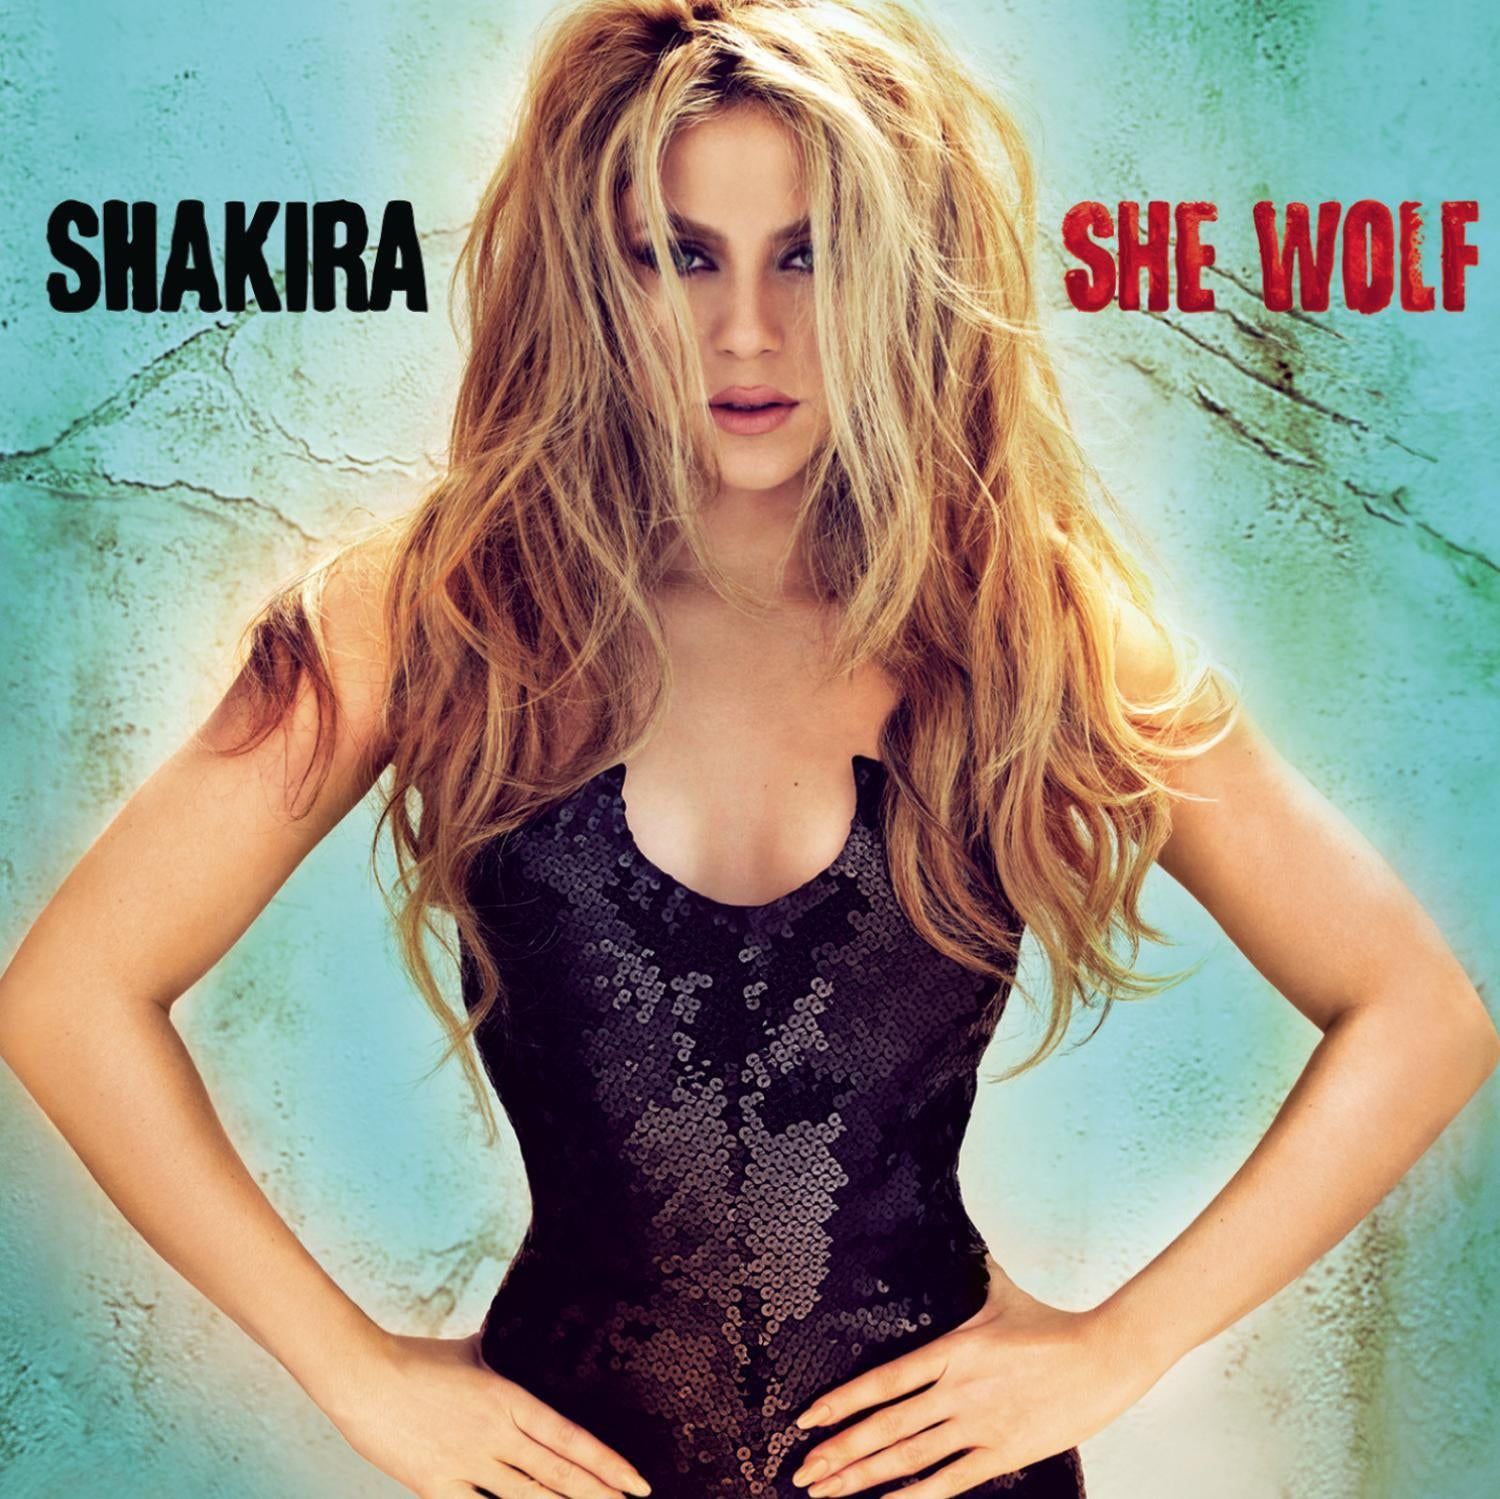 Shakira's She Wolf album was released 10 years ago today!